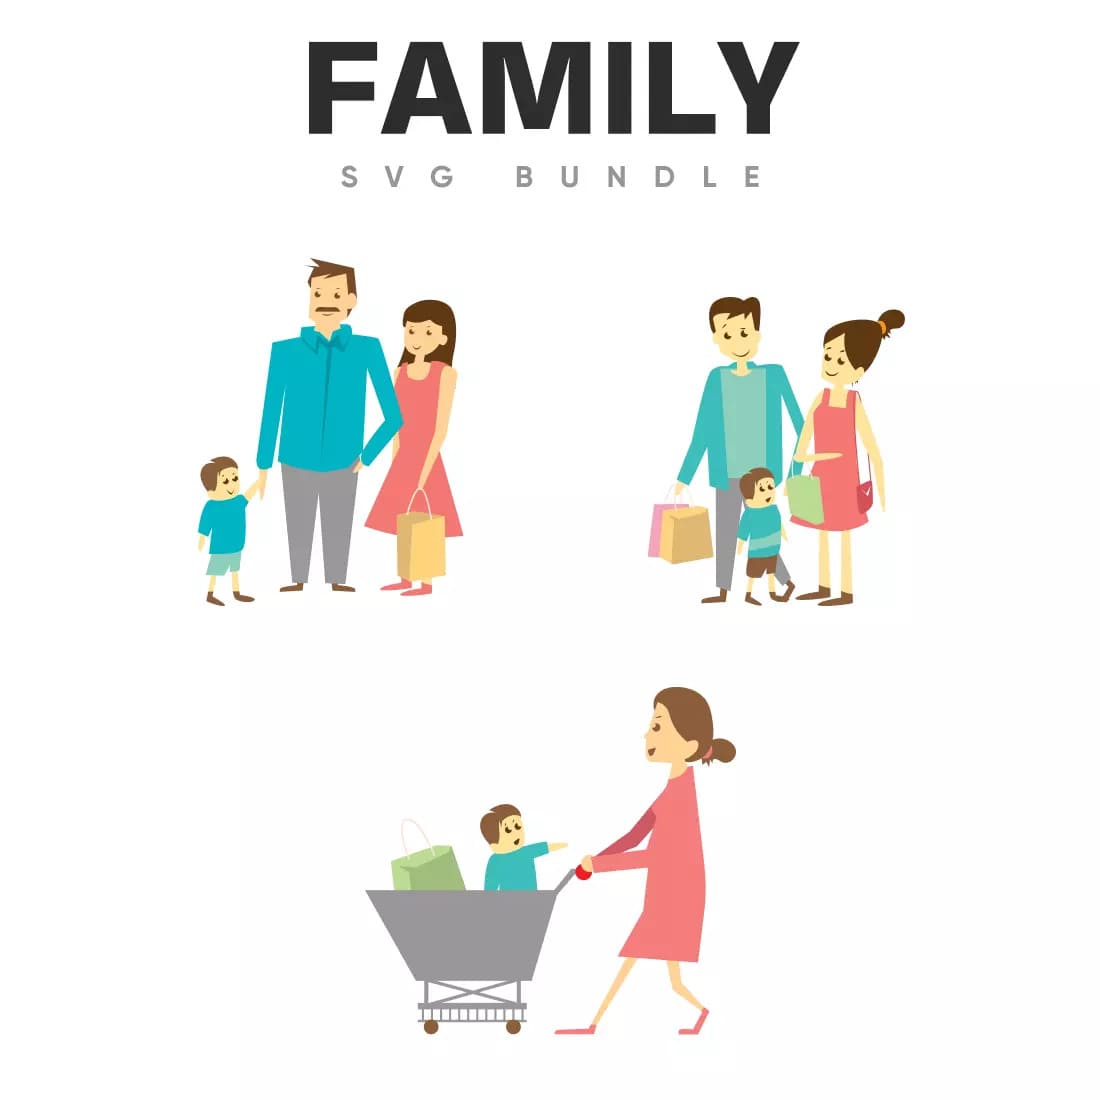 Family SVG Bundle Preview 6.